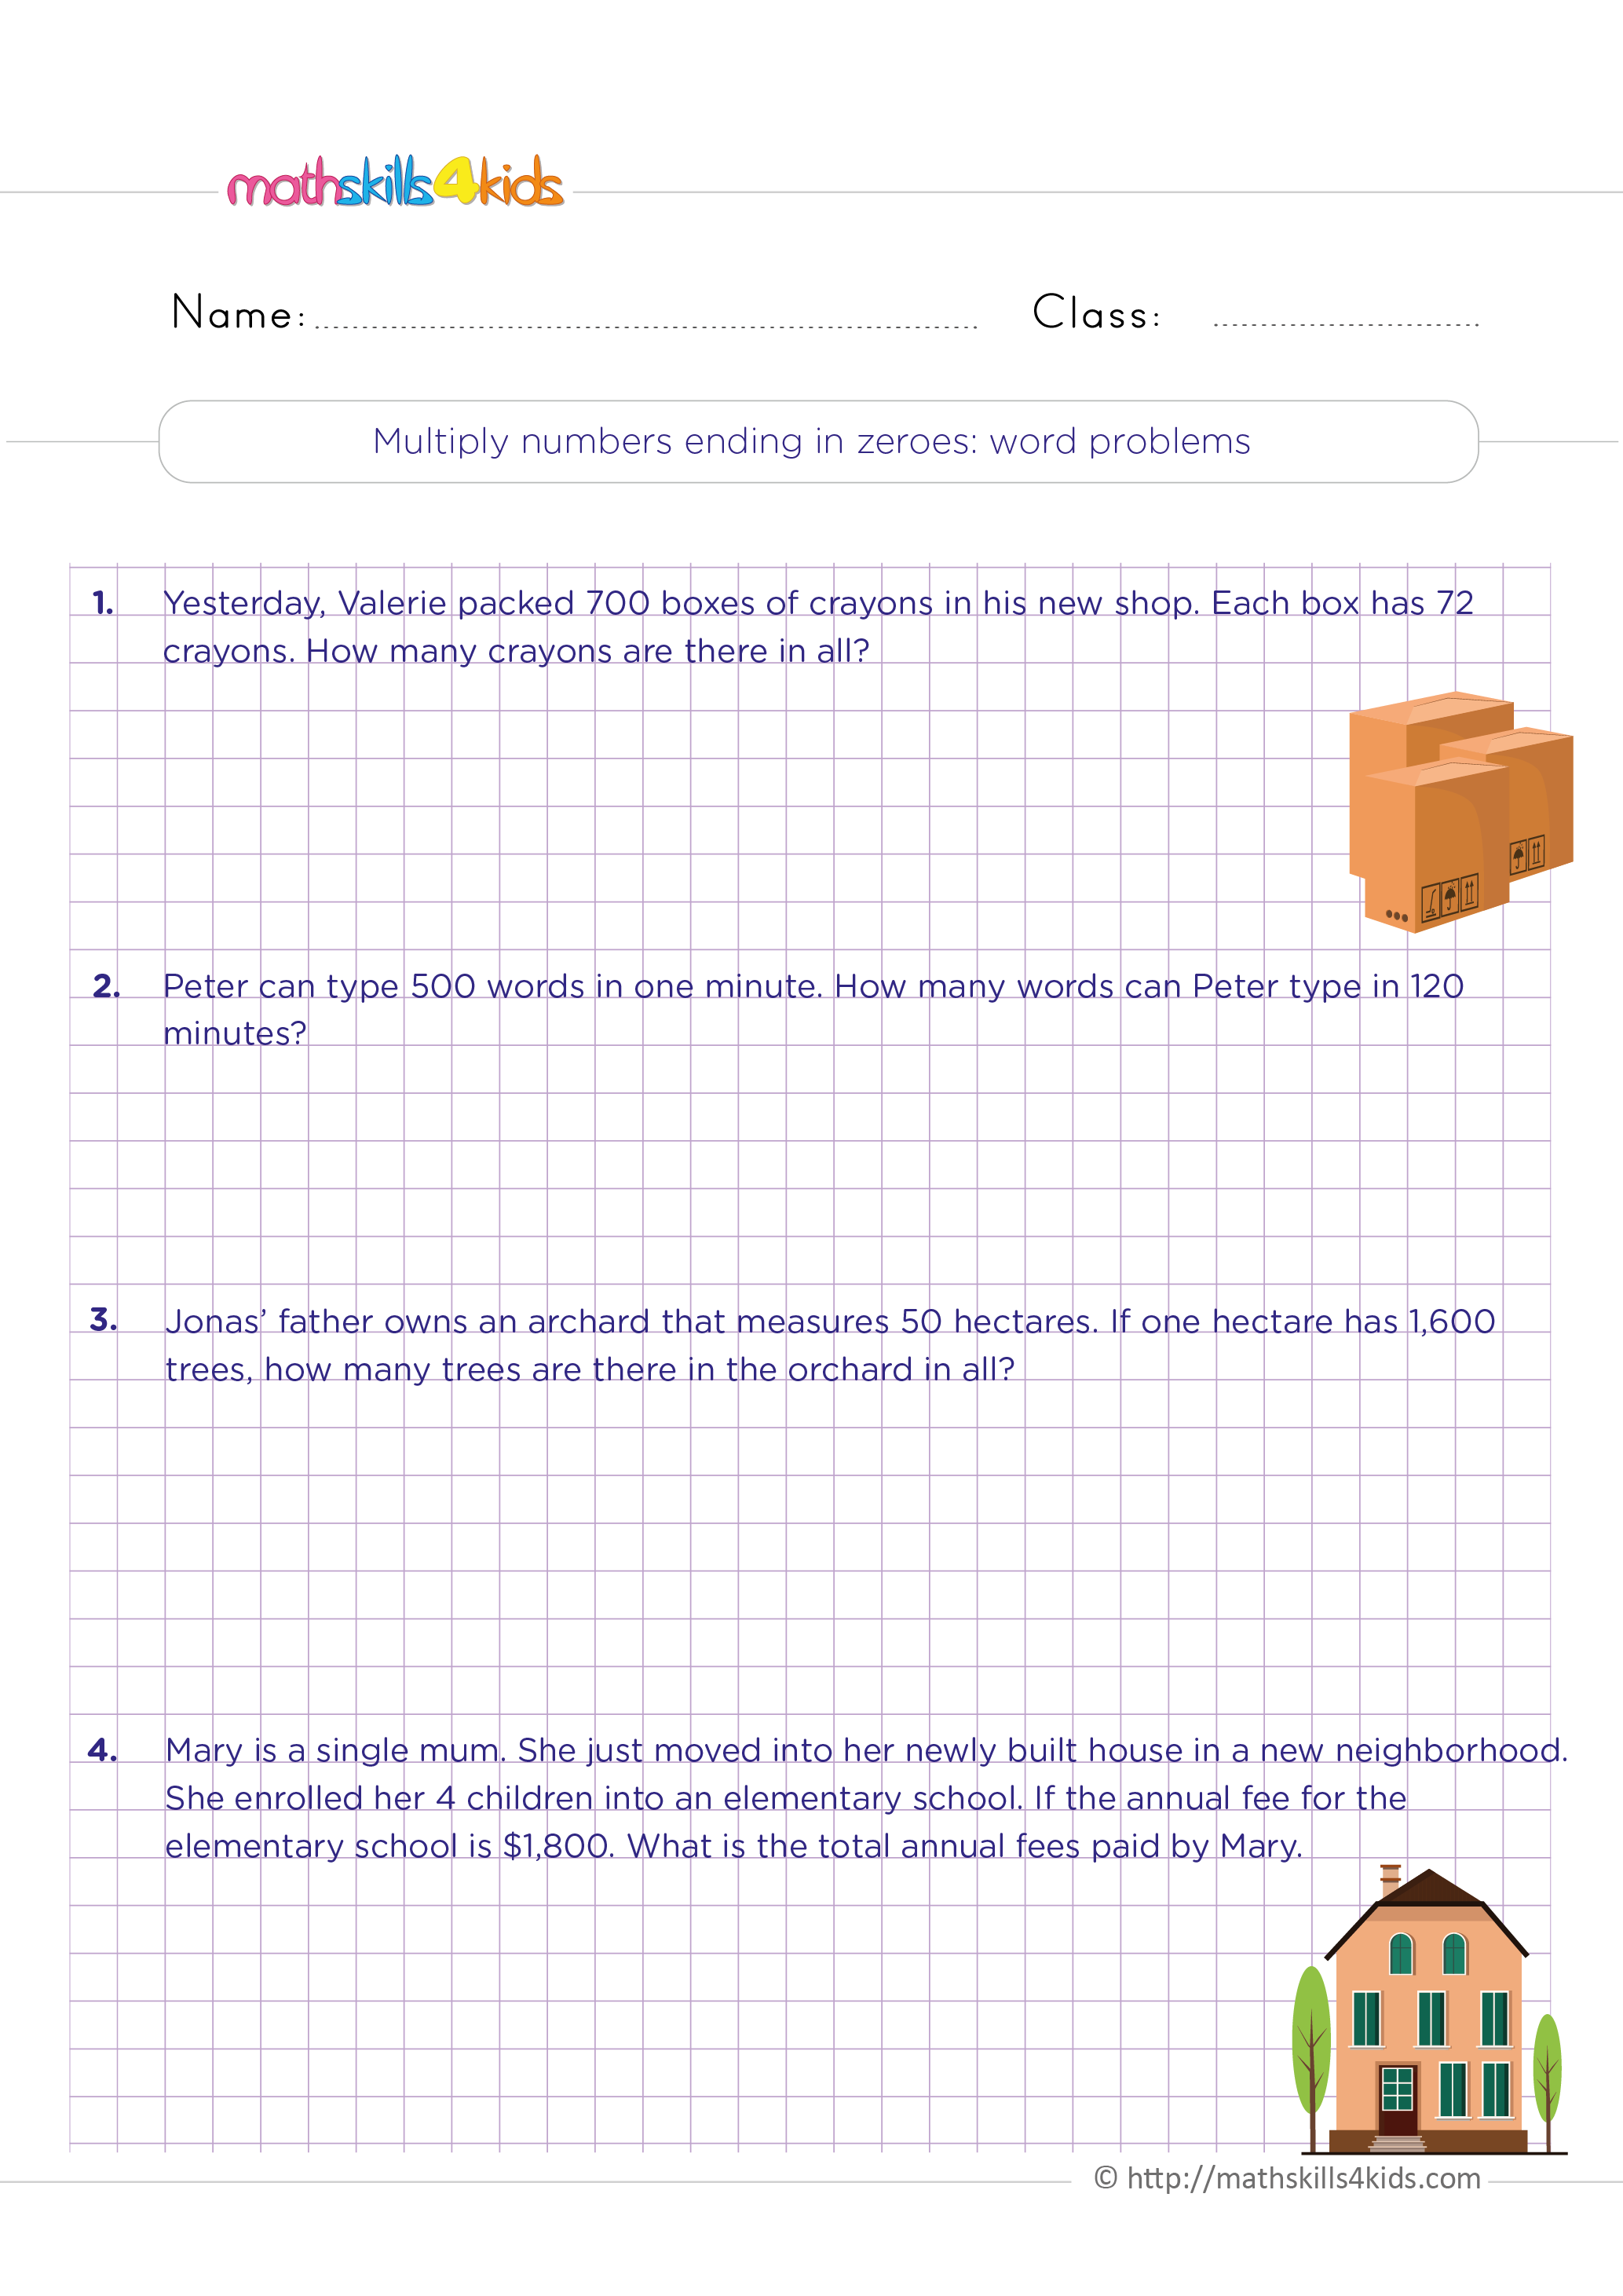 4th Grade multiplication worksheets with answers - Multiplying numbers ending with zeros word problems